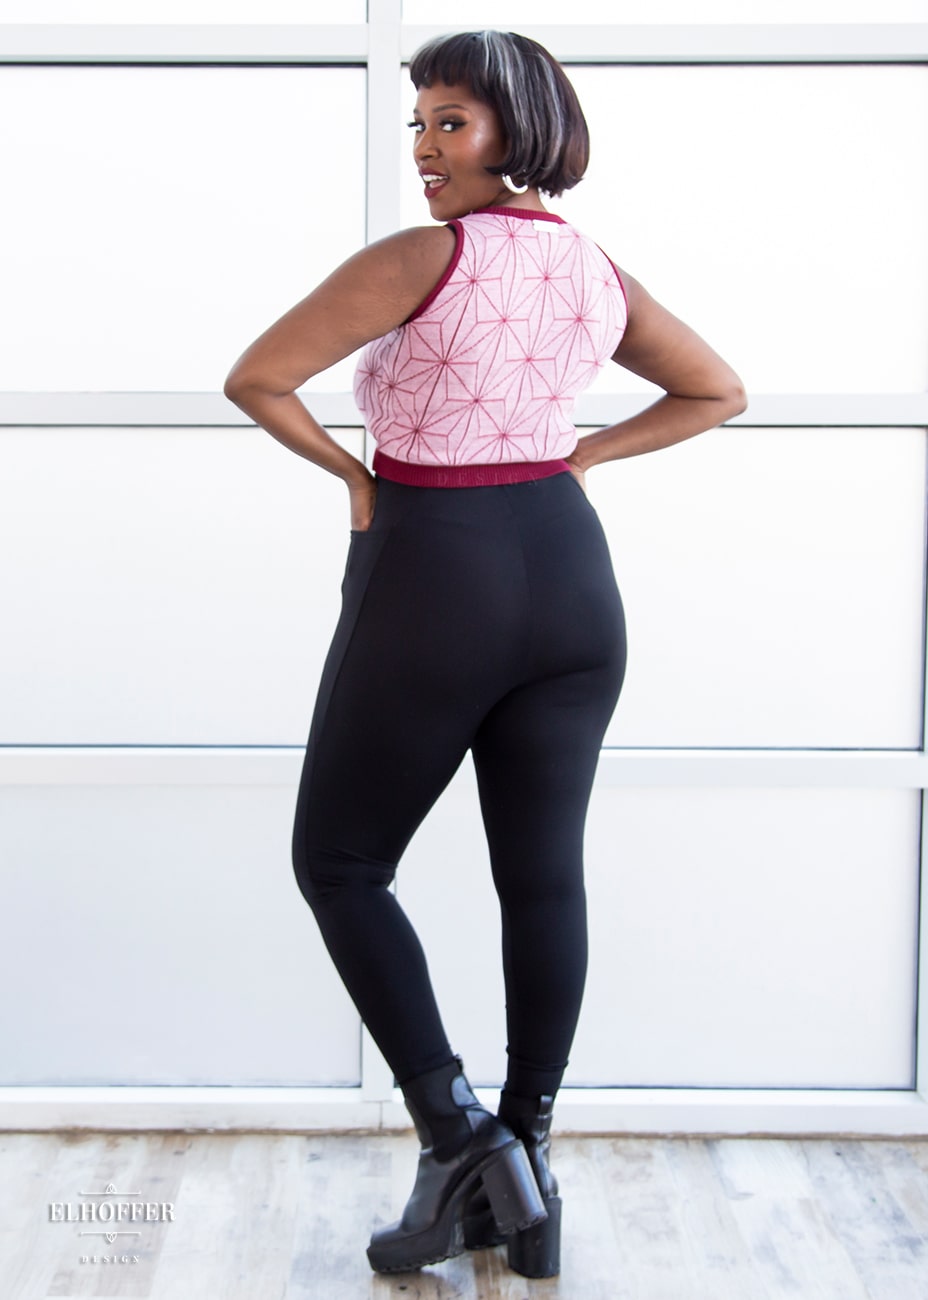 Lynsi, a medium dark skinned model with short dark brown hair with white highlights, is wearing a pair of high waisted leggings with a seamless front and side seam pockets in black.